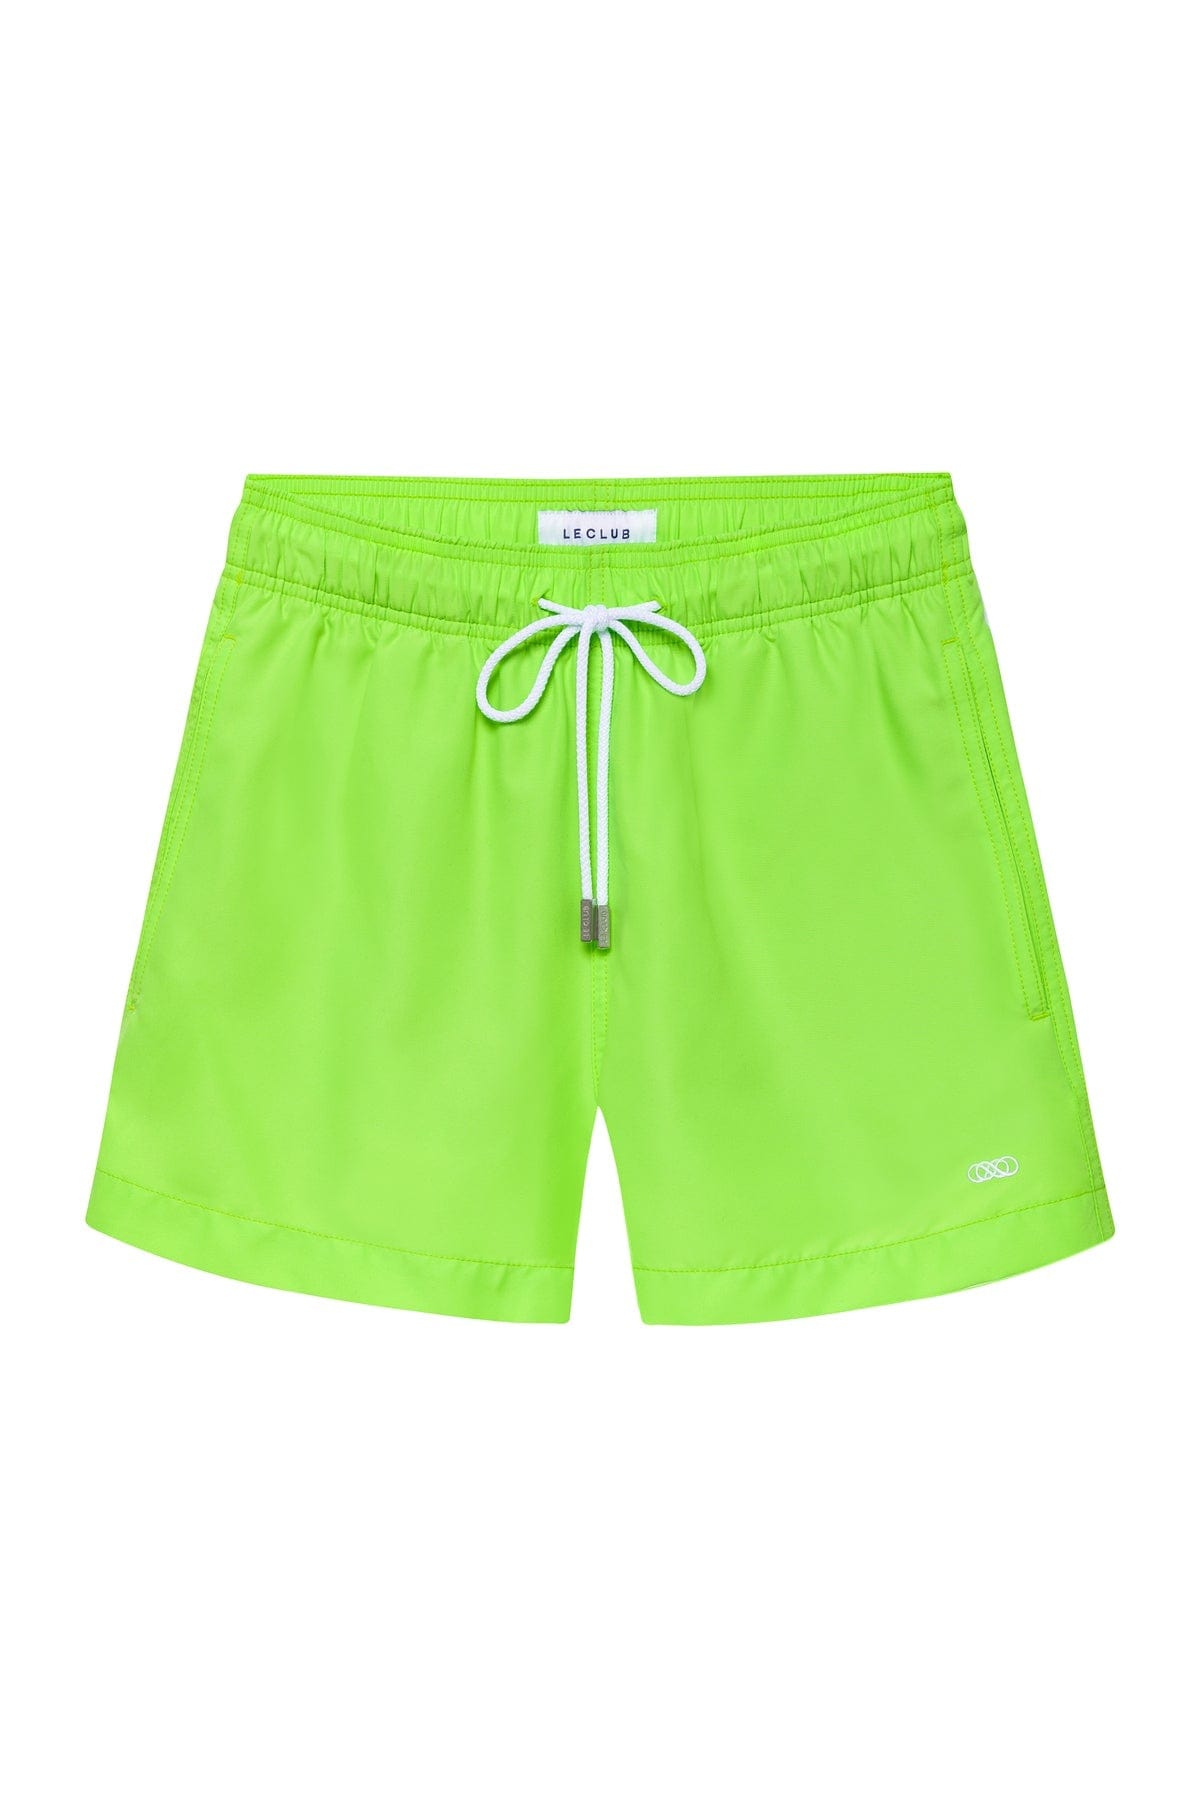 Le Club Apparel & Accessories > Clothing > Shorts 5.5 Inches / Small Club Men's Swim Trunk Classic Green 2022 Le Club Men's Swim Trunk Classic Green